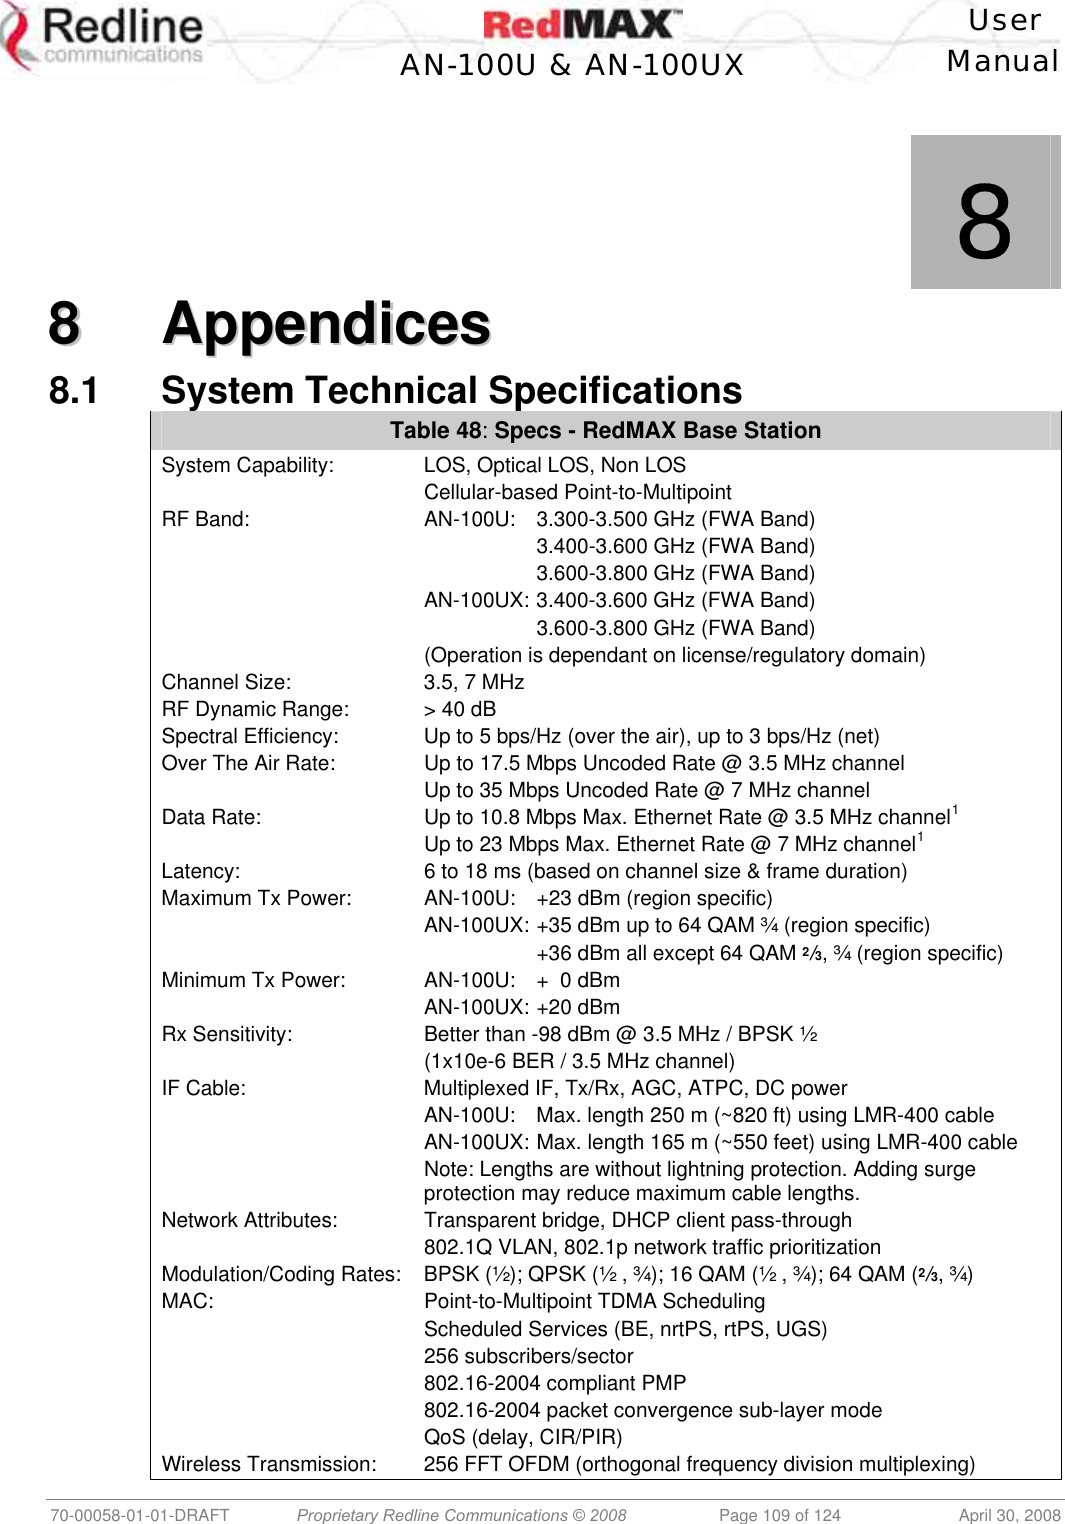    User  AN-100U &amp; AN-100UX Manual   70-00058-01-01-DRAFT  Proprietary Redline Communications © 2008   Page 109 of 124  April 30, 2008               8 88  AAppppeennddiicceess  8.1 System Technical Specifications Table 48: Specs - RedMAX Base Station System Capability:  LOS, Optical LOS, Non LOS  Cellular-based Point-to-Multipoint RF Band:   AN-100U:  3.300-3.500 GHz (FWA Band)       3.400-3.600 GHz (FWA Band)       3.600-3.800 GHz (FWA Band)  AN-100UX: 3.400-3.600 GHz (FWA Band)       3.600-3.800 GHz (FWA Band)   (Operation is dependant on license/regulatory domain)  Channel Size:   3.5, 7 MHz RF Dynamic Range:   &gt; 40 dB Spectral Efficiency:   Up to 5 bps/Hz (over the air), up to 3 bps/Hz (net) Over The Air Rate:   Up to 17.5 Mbps Uncoded Rate @ 3.5 MHz channel   Up to 35 Mbps Uncoded Rate @ 7 MHz channel Data Rate:  Up to 10.8 Mbps Max. Ethernet Rate @ 3.5 MHz channel 1   Up to 23 Mbps Max. Ethernet Rate @ 7 MHz channel 1 Latency:  6 to 18 ms (based on channel size &amp; frame duration) Maximum Tx Power:   AN-100U:  +23 dBm (region specific)   AN-100UX: +35 dBm up to 64 QAM ¾ (region specific)       +36 dBm all except 64 QAM 2/3, ¾ (region specific) Minimum Tx Power:   AN-100U:  +  0 dBm  AN-100UX: +20 dBm Rx Sensitivity:   Better than -98 dBm @ 3.5 MHz / BPSK ½   (1x10e-6 BER / 3.5 MHz channel) IF Cable:   Multiplexed IF, Tx/Rx, AGC, ATPC, DC power    AN-100U:  Max. length 250 m (~820 ft) using LMR-400 cable   AN-100UX: Max. length 165 m (~550 feet) using LMR-400 cable   Note: Lengths are without lightning protection. Adding surge protection may reduce maximum cable lengths. Network Attributes:   Transparent bridge, DHCP client pass-through   802.1Q VLAN, 802.1p network traffic prioritization Modulation/Coding Rates:   BPSK (½); QPSK (½ , ¾); 16 QAM (½ , ¾); 64 QAM (2/3, ¾) MAC: Point-to-Multipoint TDMA Scheduling   Scheduled Services (BE, nrtPS, rtPS, UGS)  256 subscribers/sector  802.16-2004 compliant PMP   802.16-2004 packet convergence sub-layer mode   QoS (delay, CIR/PIR) Wireless Transmission:   256 FFT OFDM (orthogonal frequency division multiplexing) 